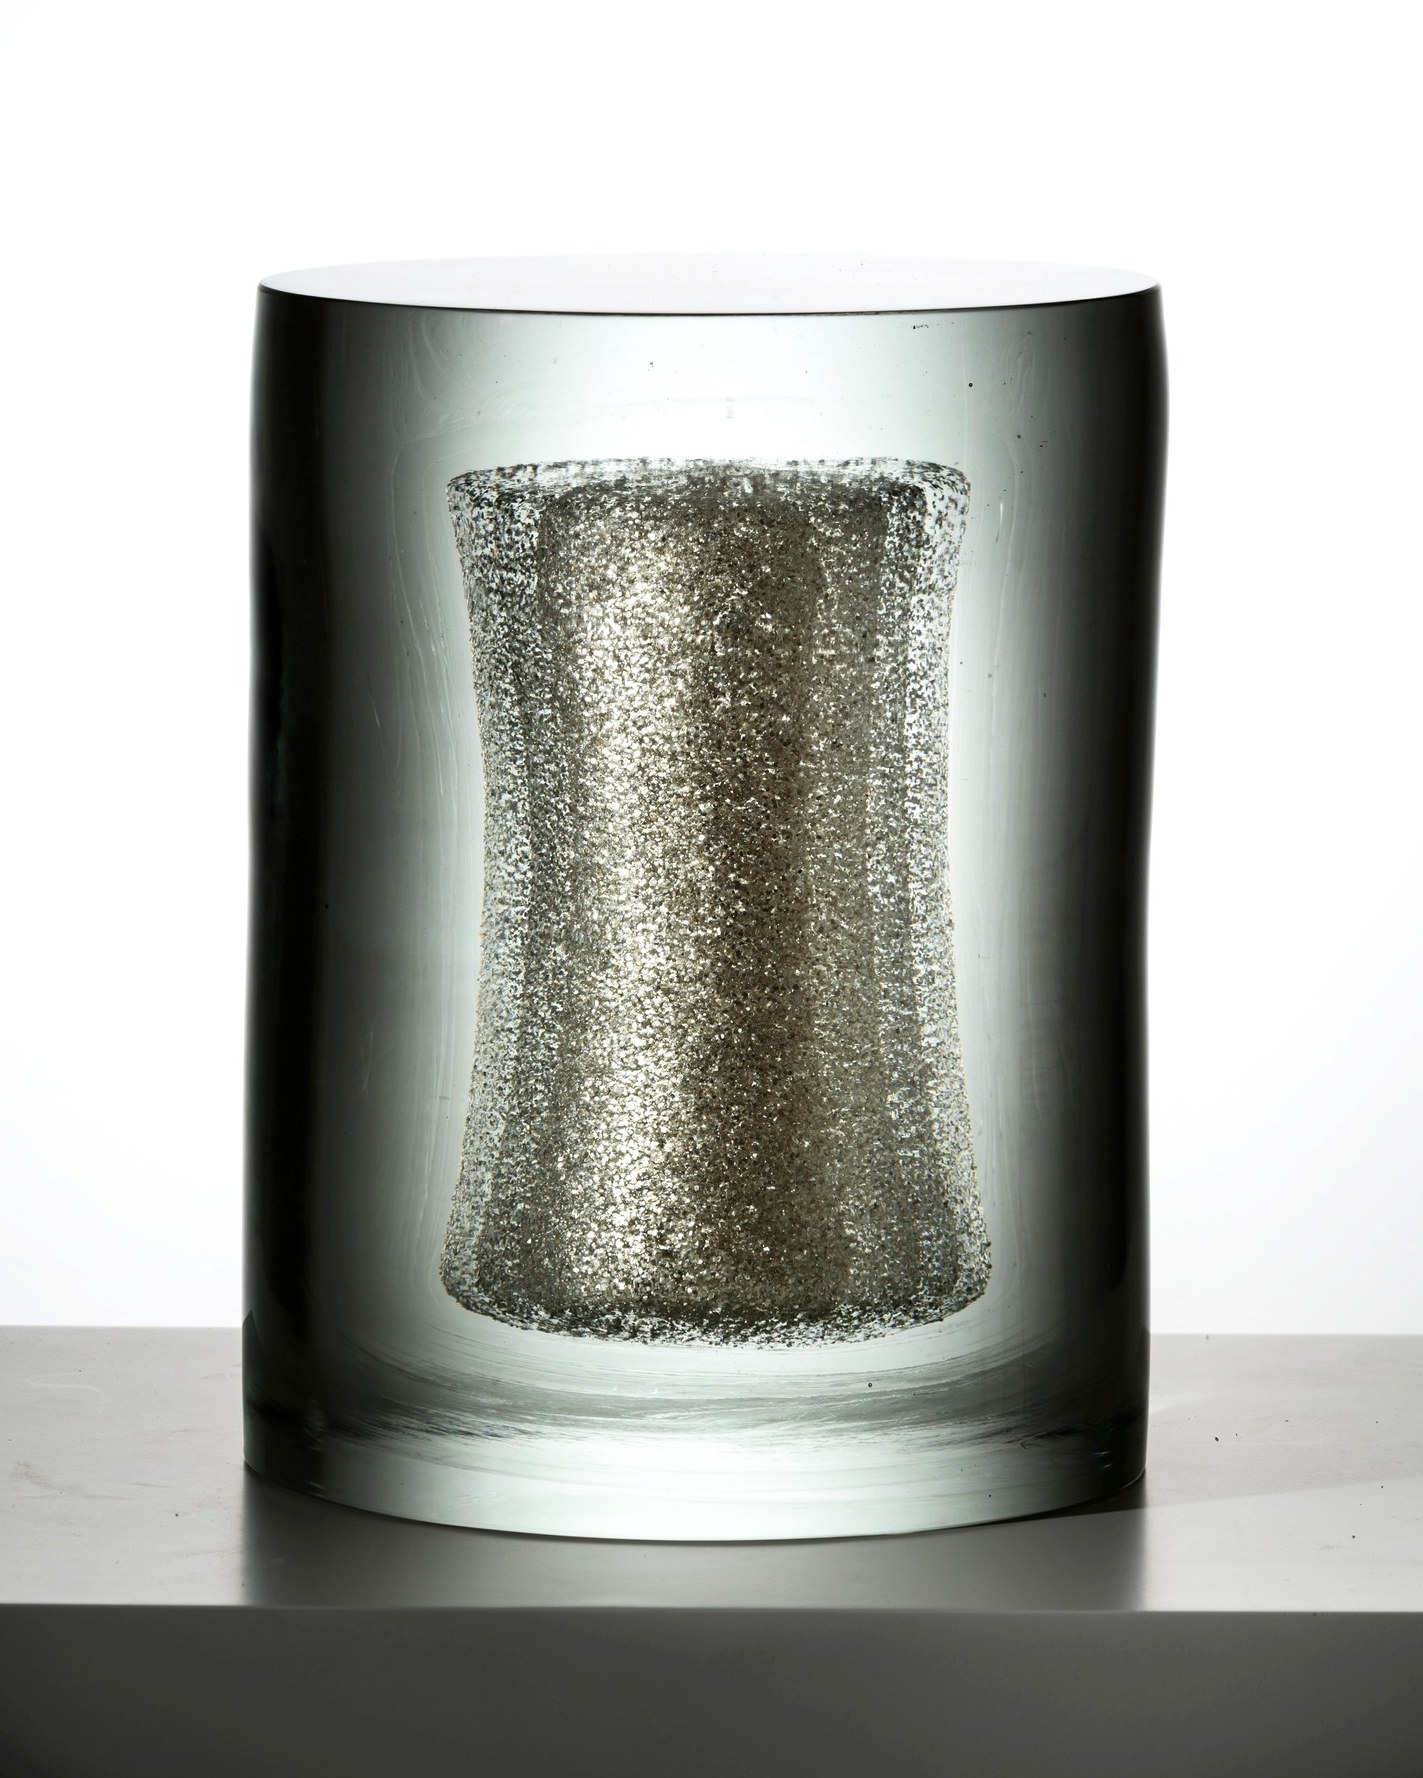 Ilkka Suppanen - Layers of silver inside of glass